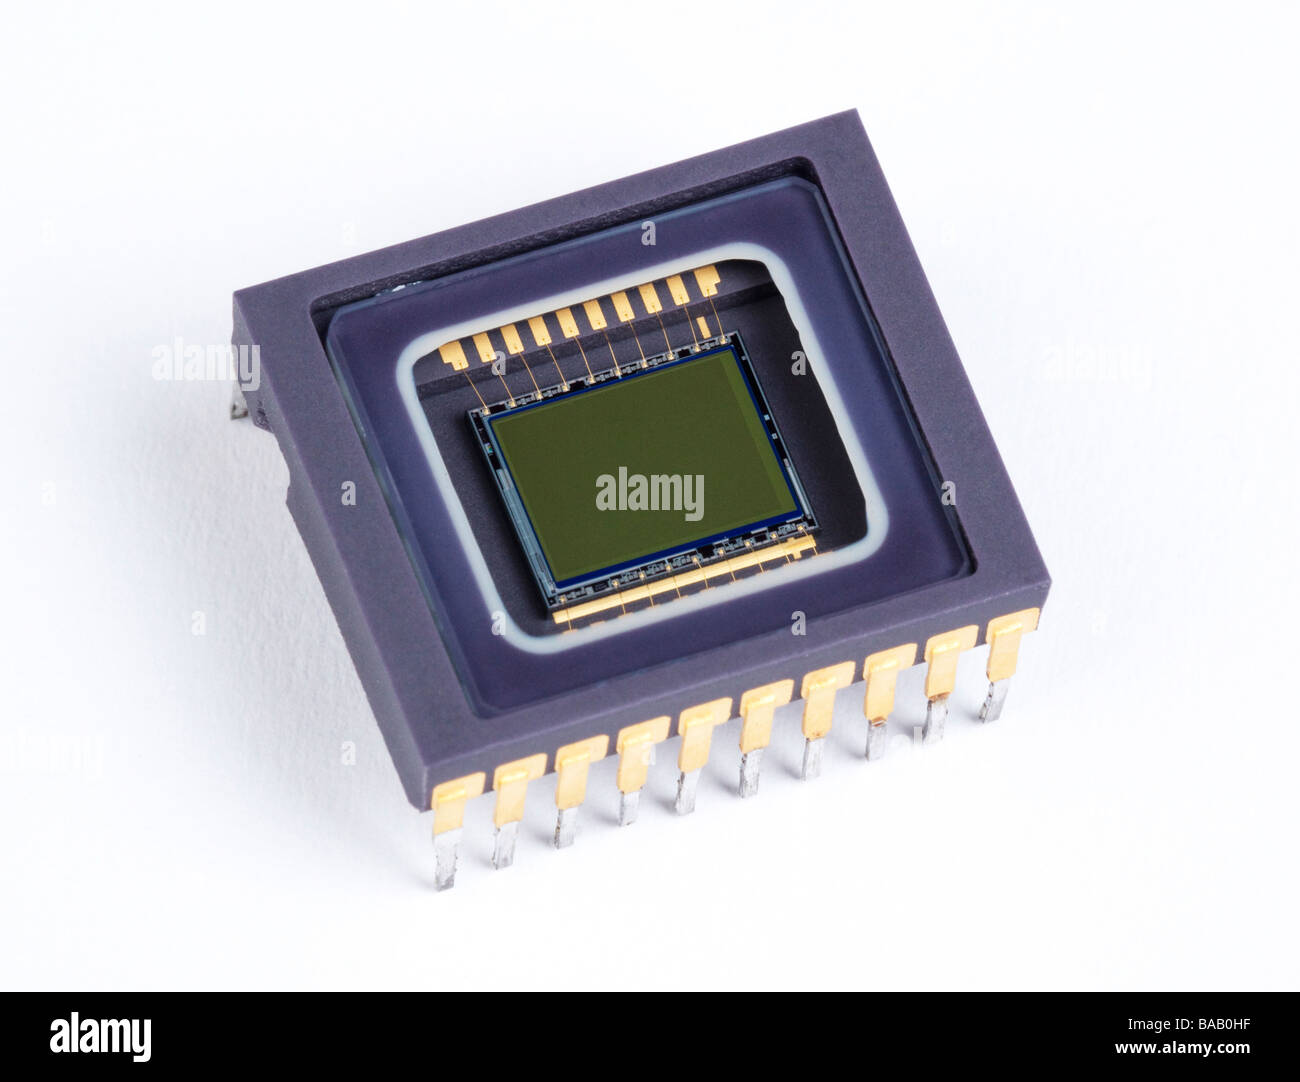 Sony CCD (charge coupled device) image sensor for digital cameras and video  Stock Photo - Alamy